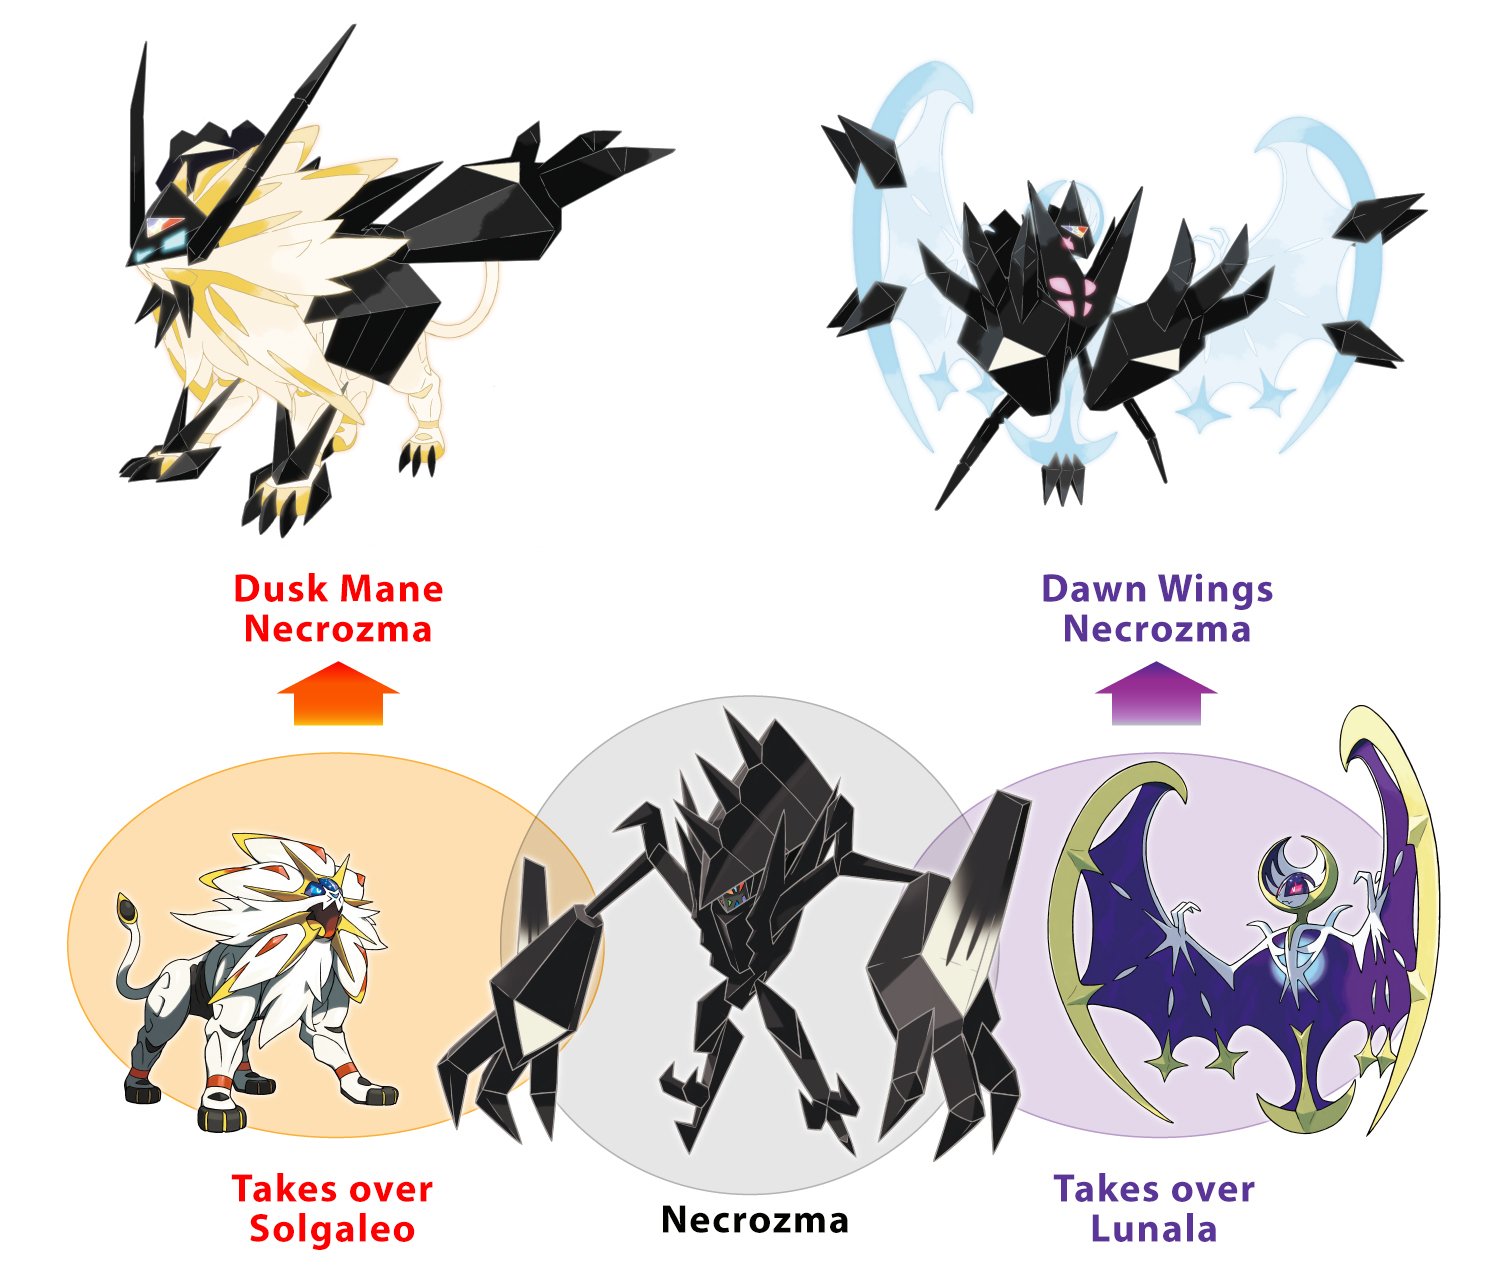 Pokémon Sun and Moon: New Z-Moves and Ultra Beasts revealed